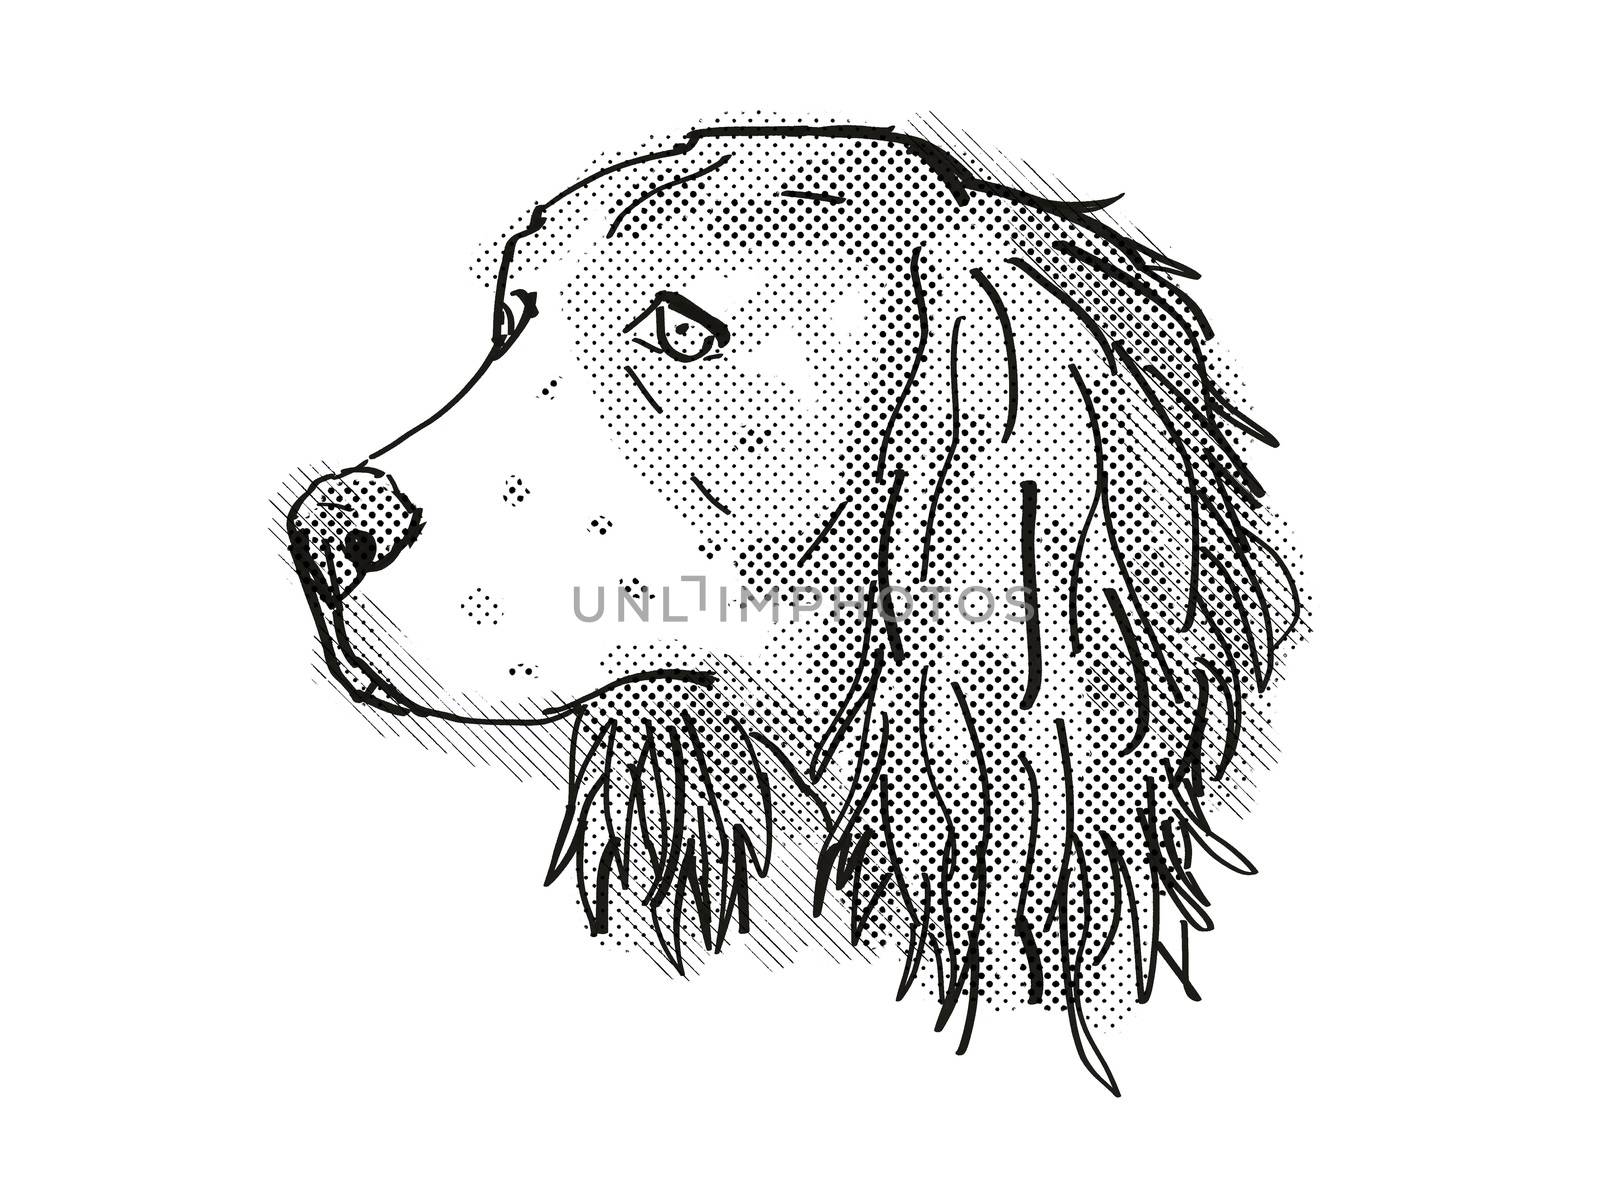 Retro cartoon style drawing of head of an English Springer Spaniel, a domestic dog or canine breed on isolated white background done in black and white.